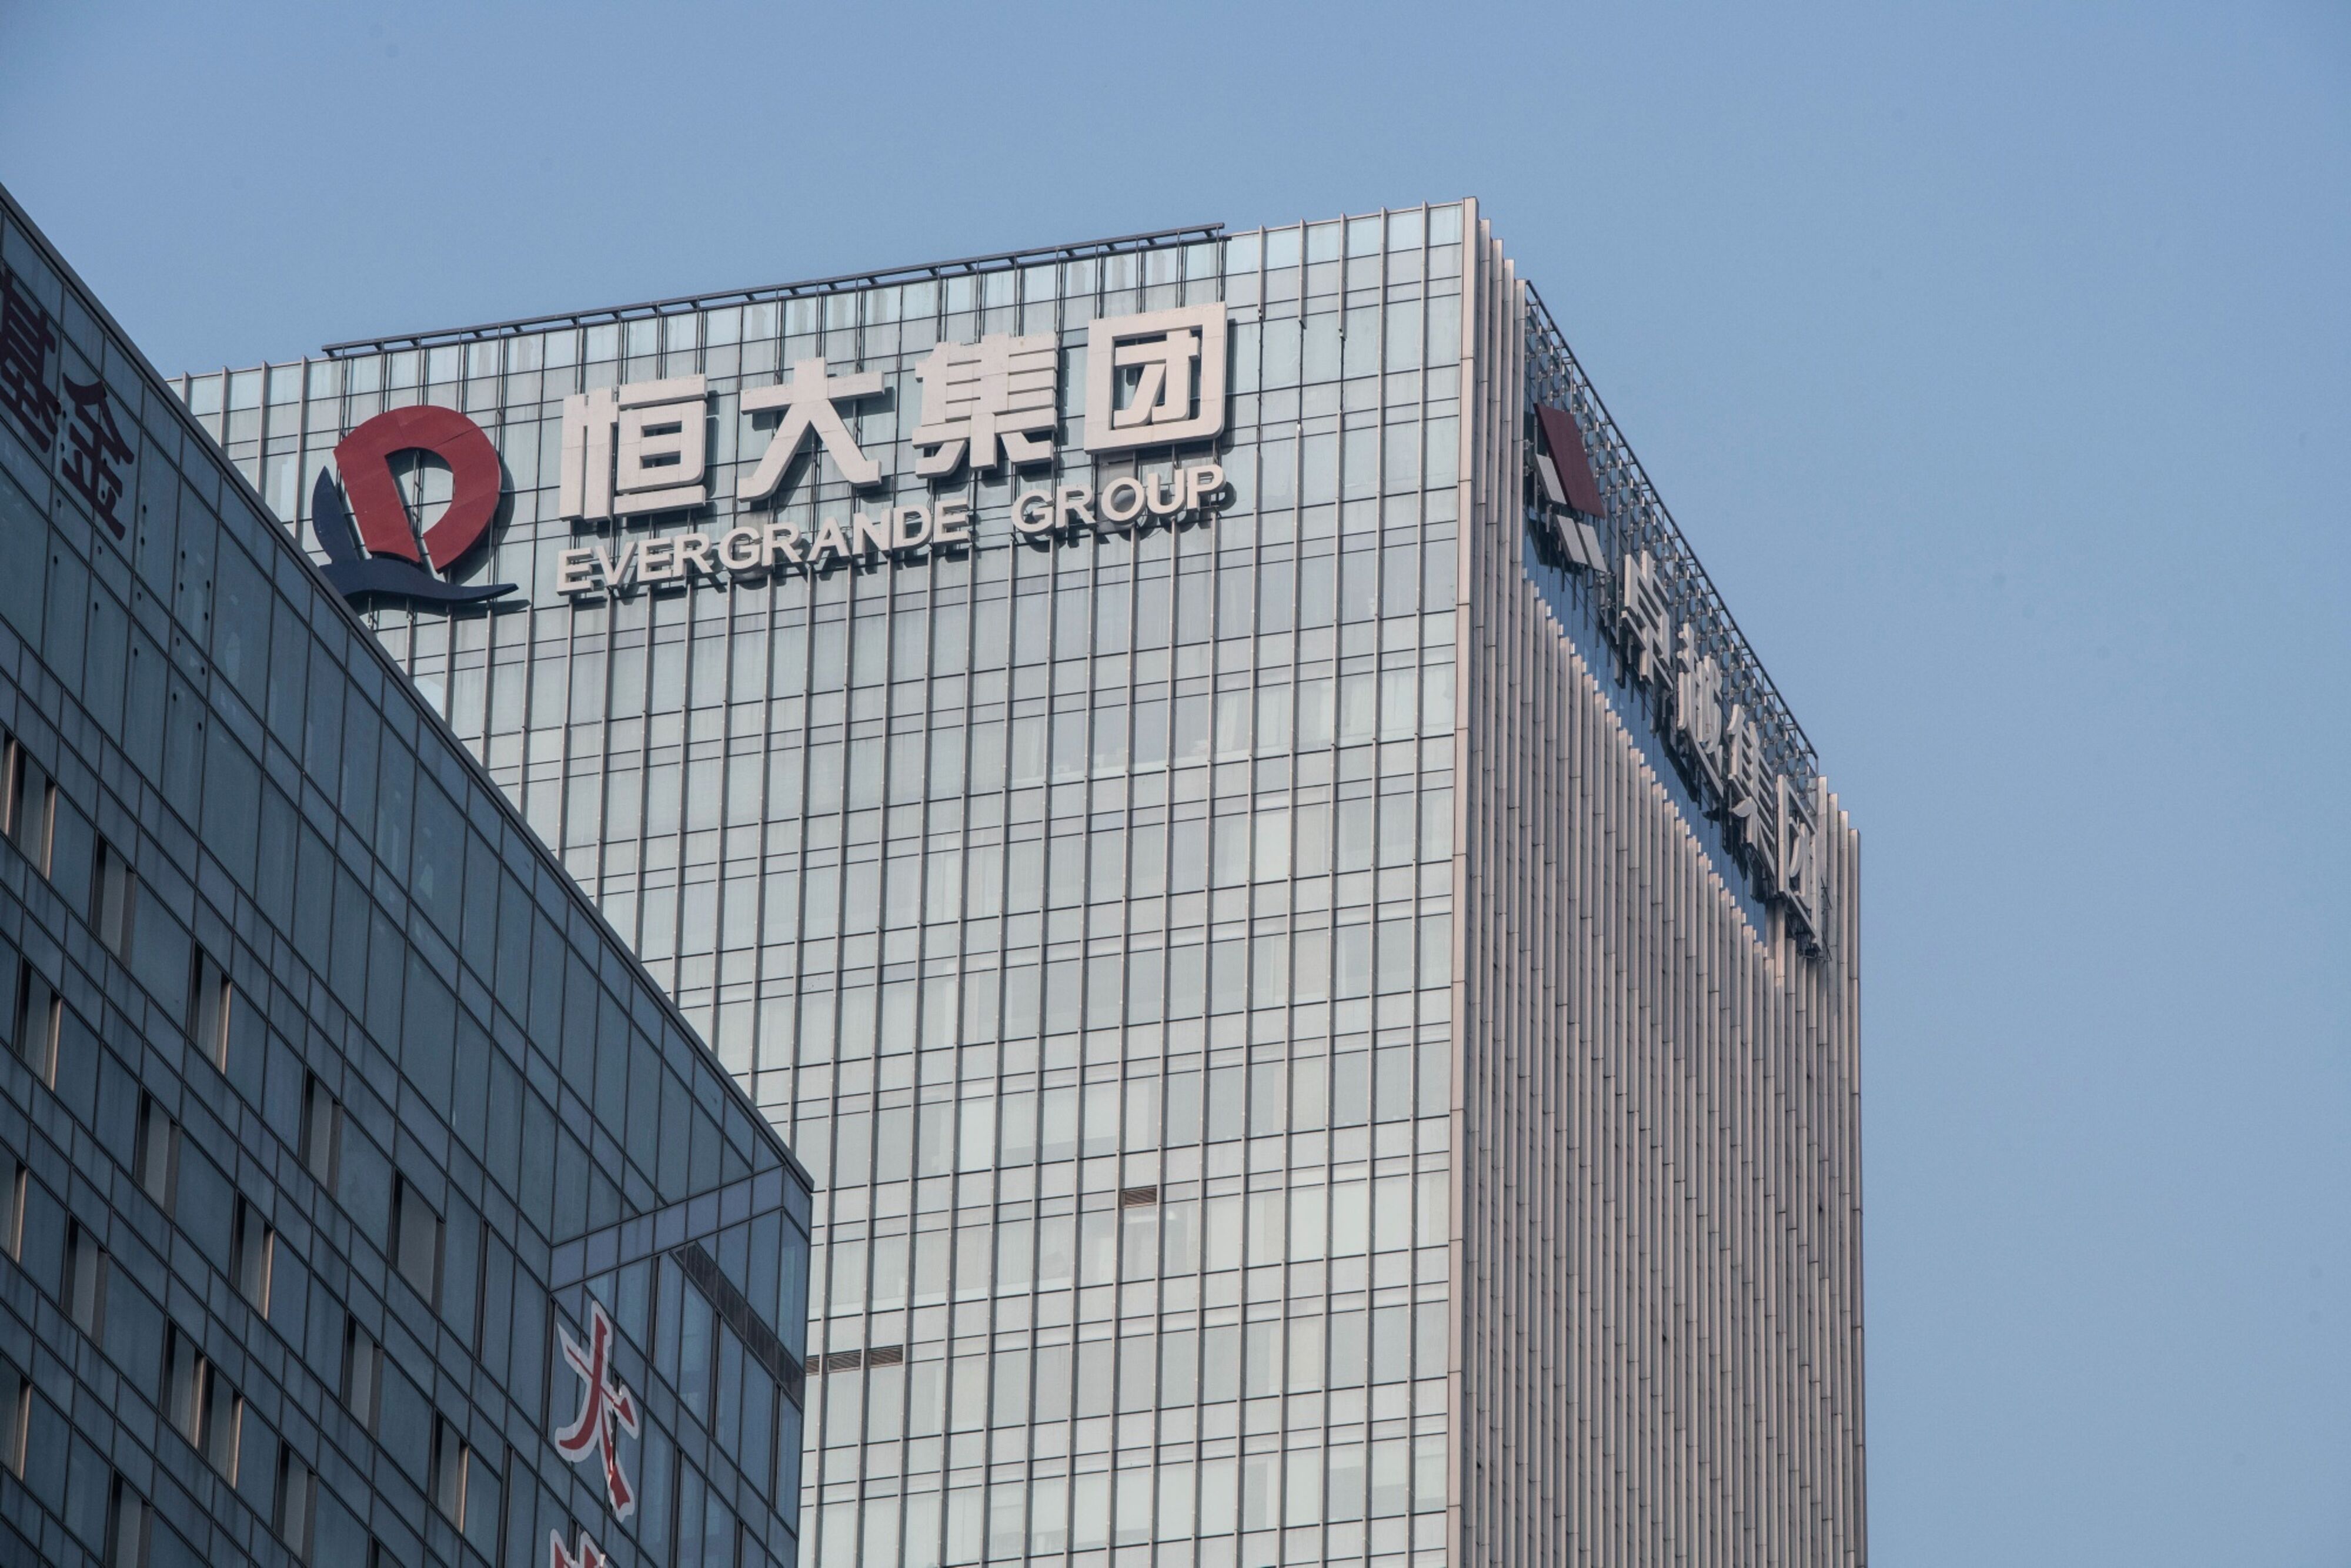 At the epicenter of China’s property crisis, Evergrande is under pressure to finalize a blueprint for its offshore debt restructuring as it grapples with an even bigger pile of total liabilities. Photo: Bloomberg